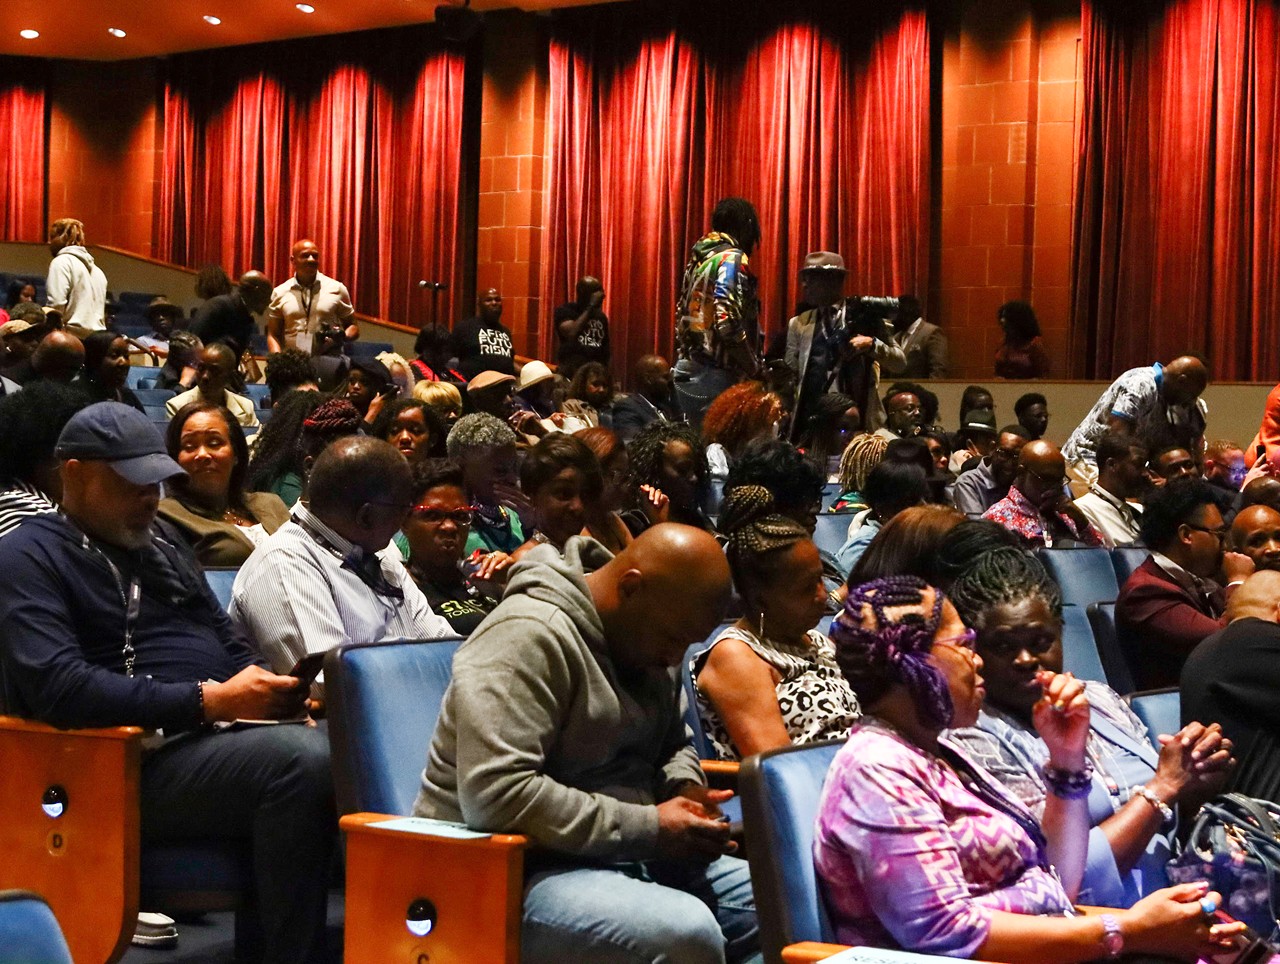 Photos From the 11th Annual Greater Cleveland Urban Film Festival Opening Night